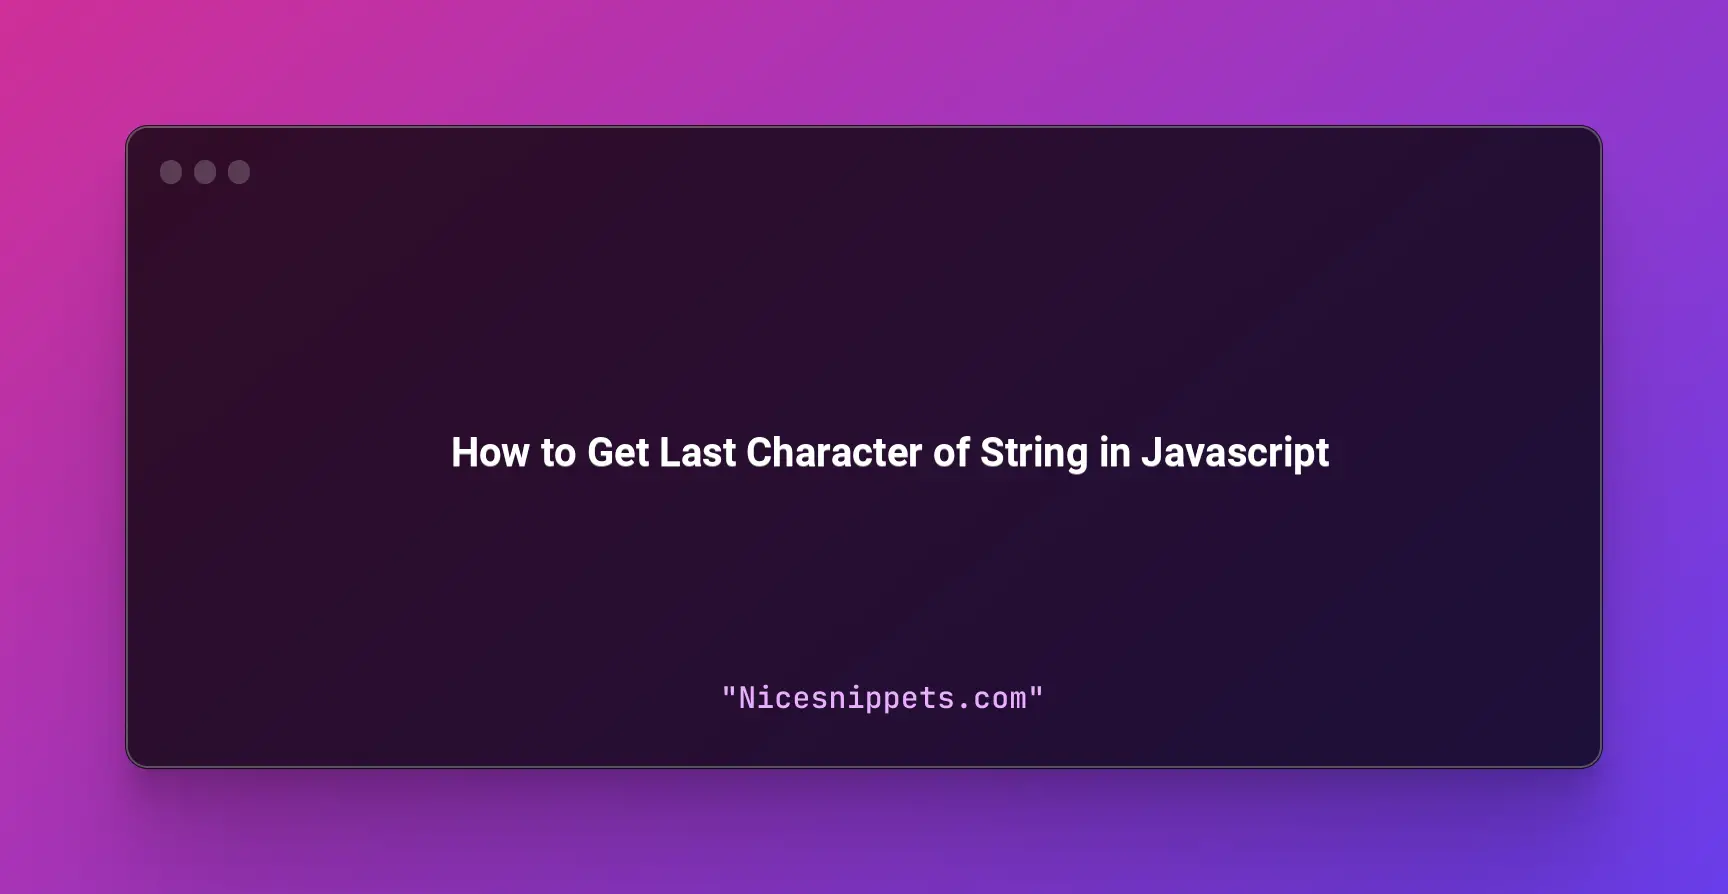 How to Get Last Character of String in Javascript?